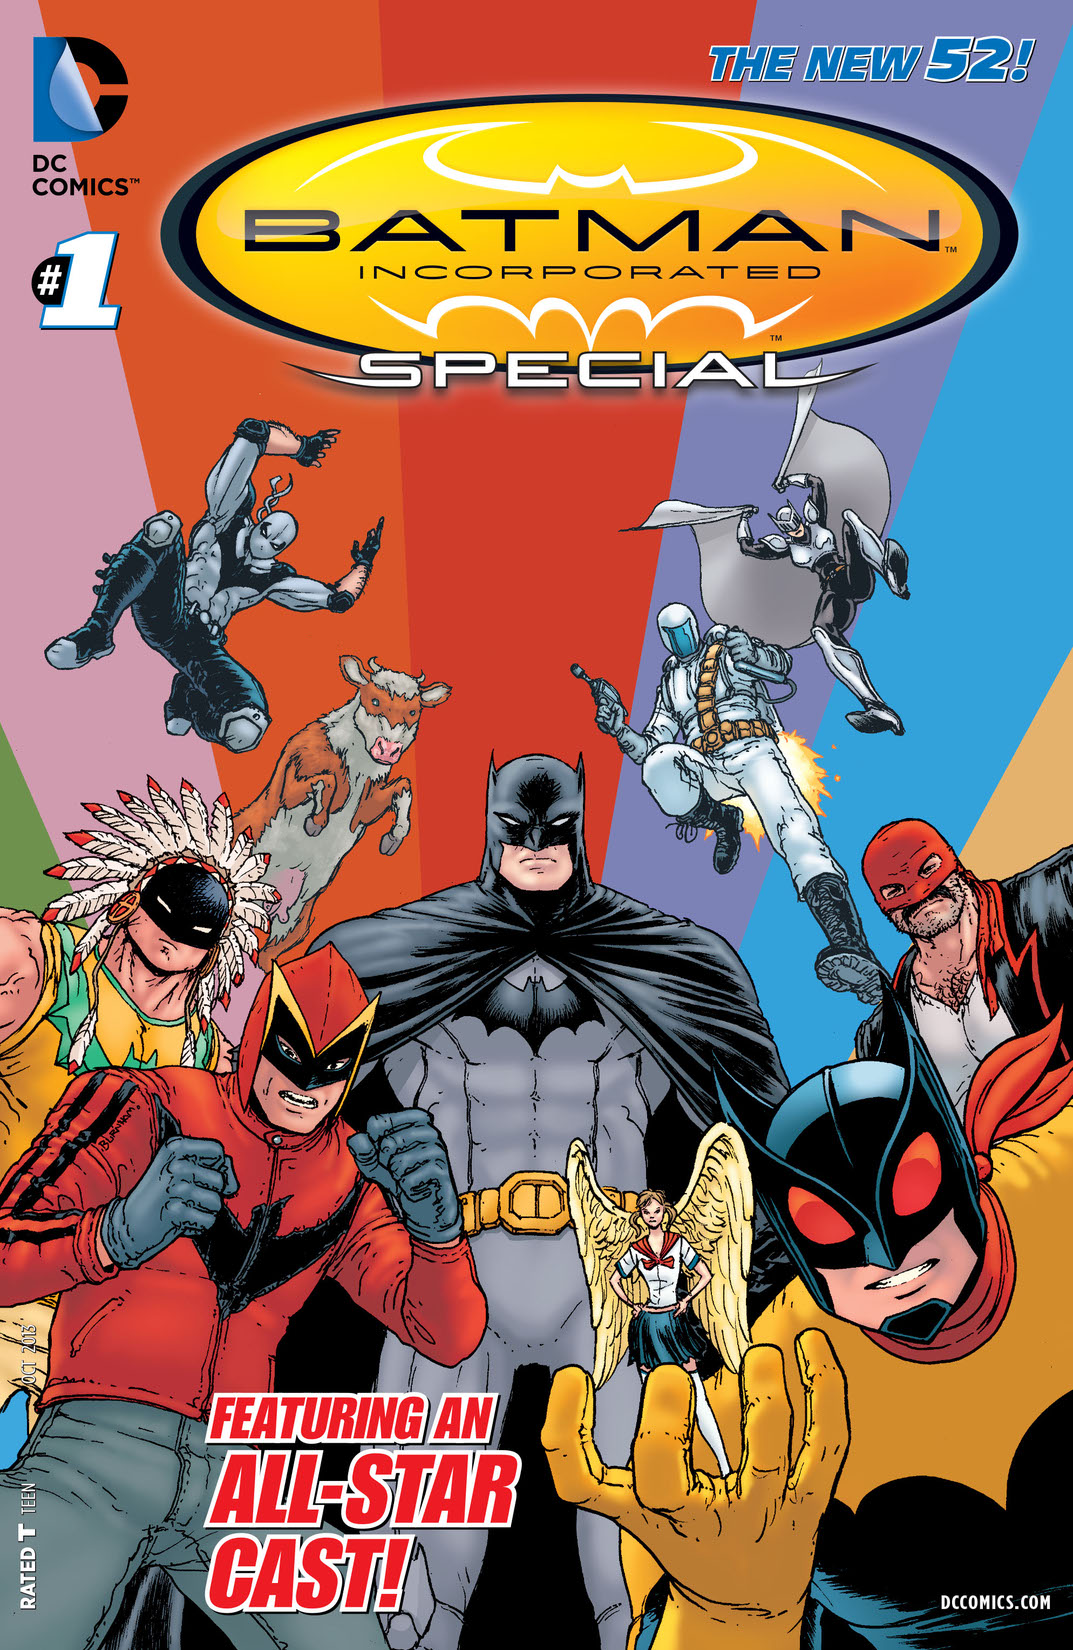 Batman Incorporated Special (2013-) #1 preview images